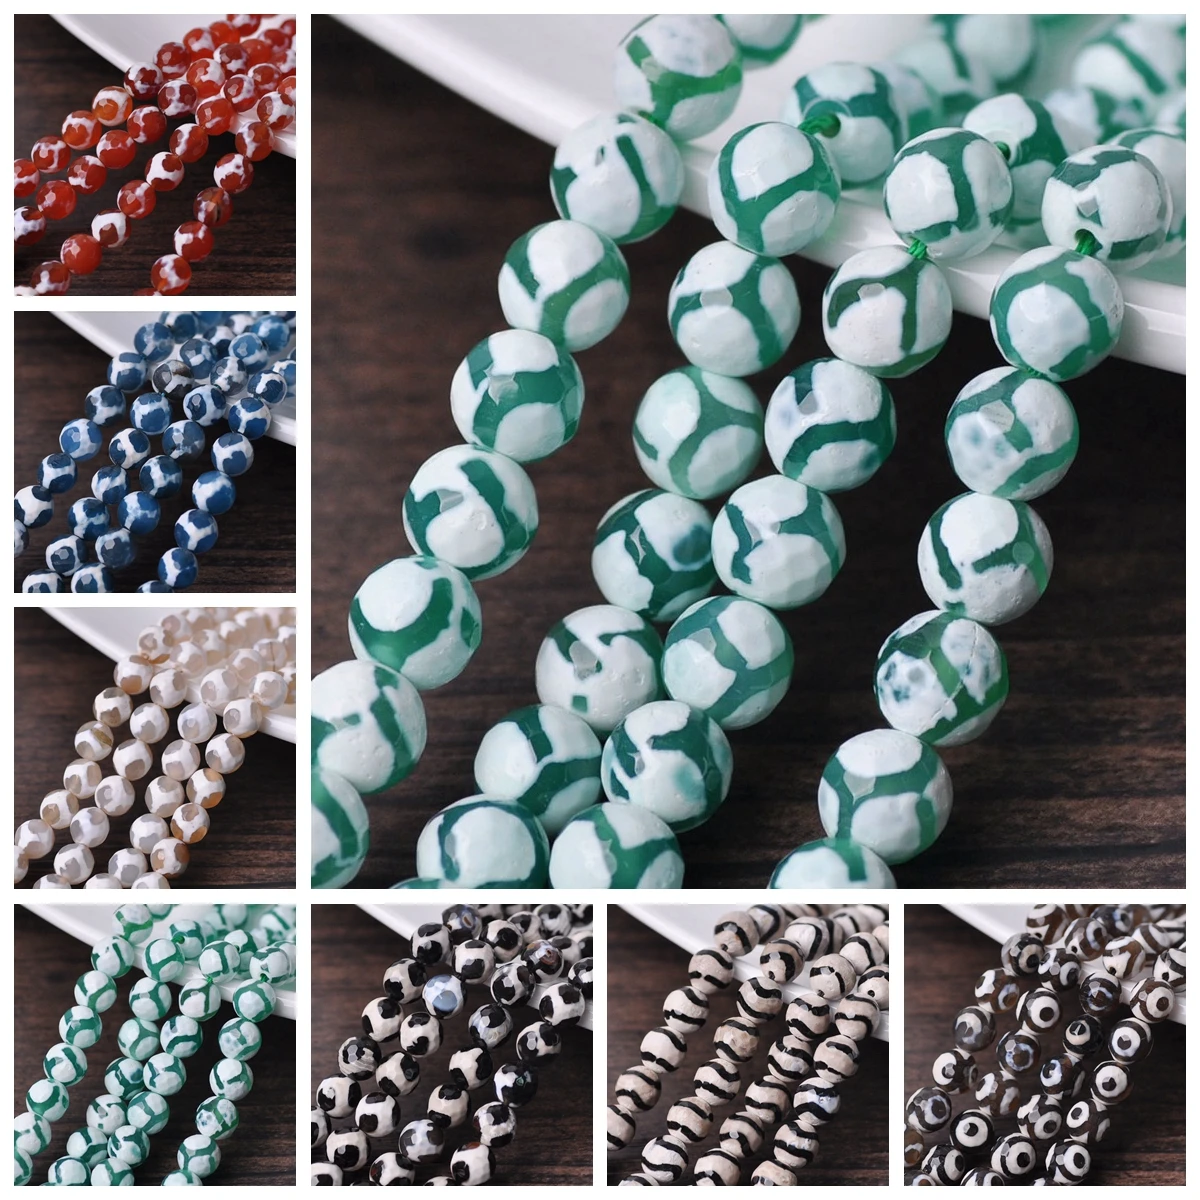 45pcs 8mm Round Faceted Combined Agate Stone Loose Beads Lot For DIY Jewelry Making Crafts Findings large multi faceted stone resin epoxy mold for jewelry soap ice making isomalt baking craft